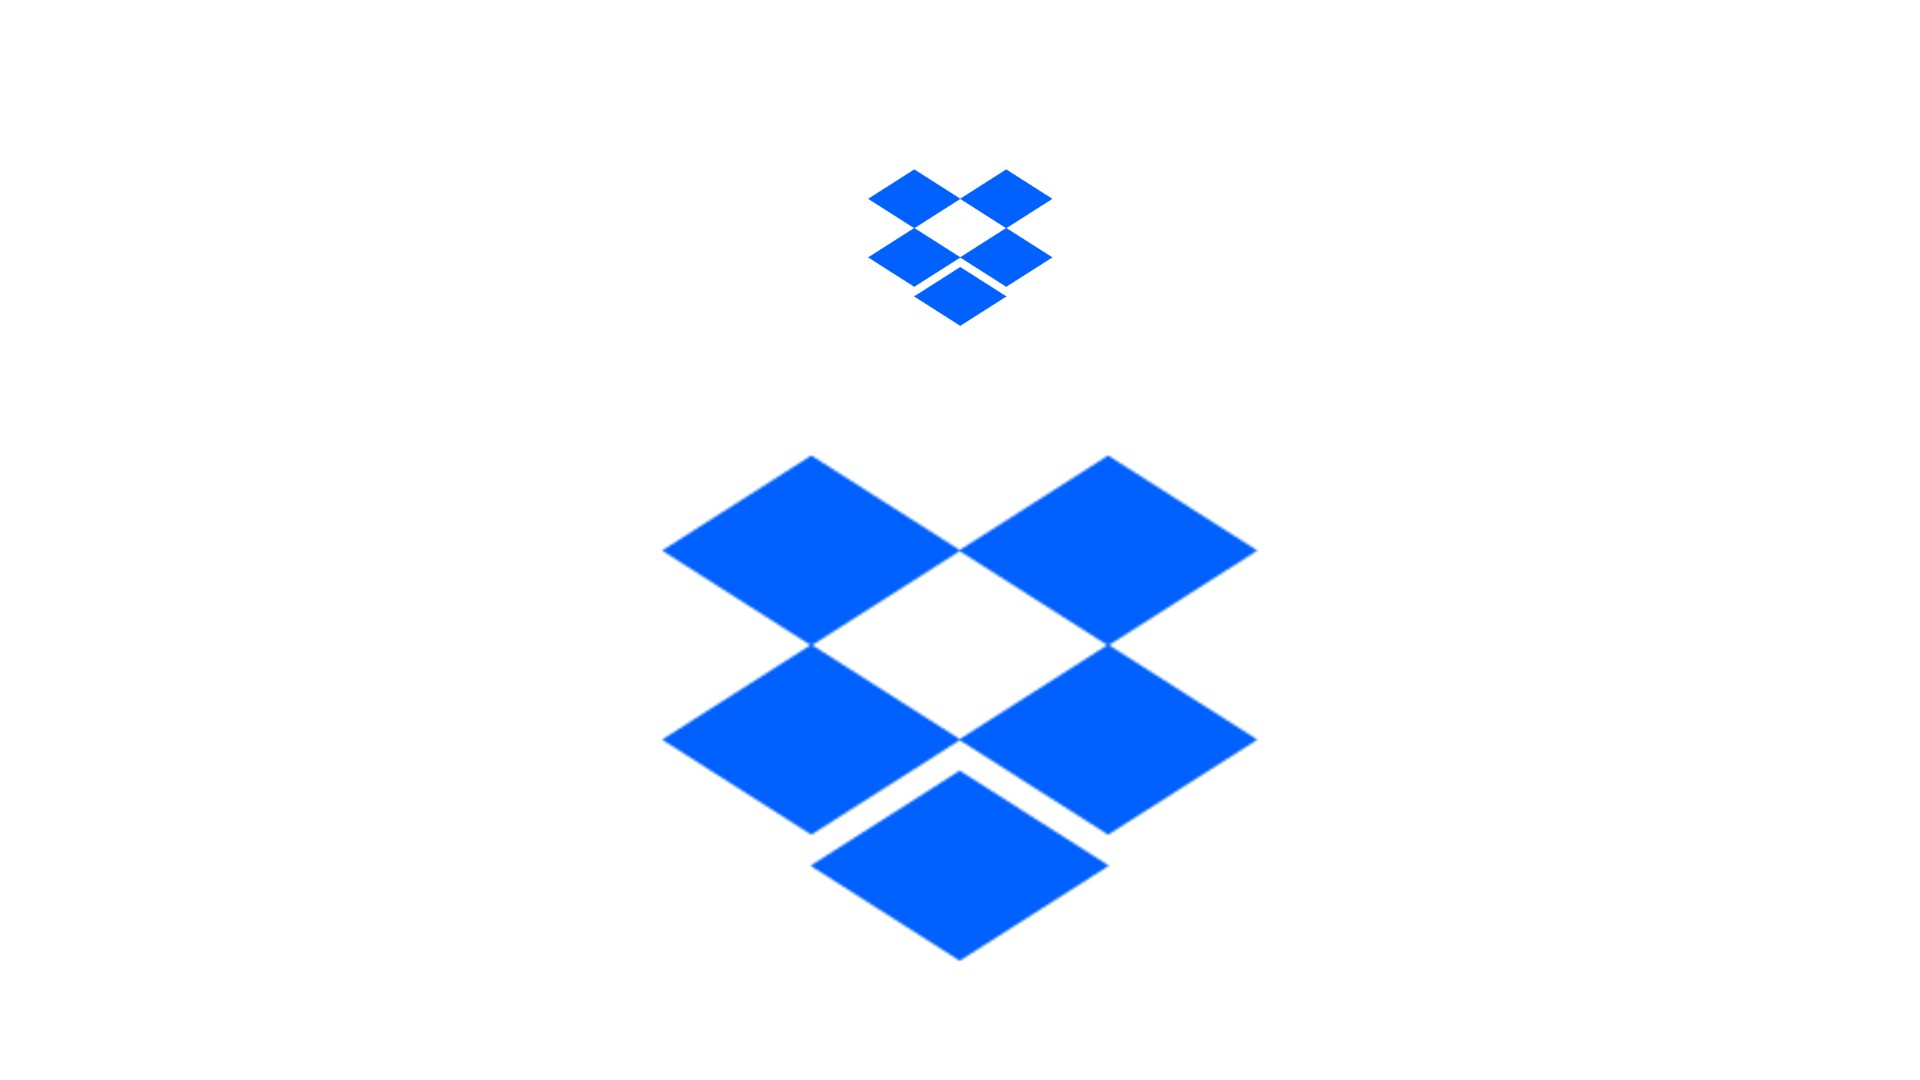 How To Unlink Dropbox Devices To Meet The New Limits For Free Users